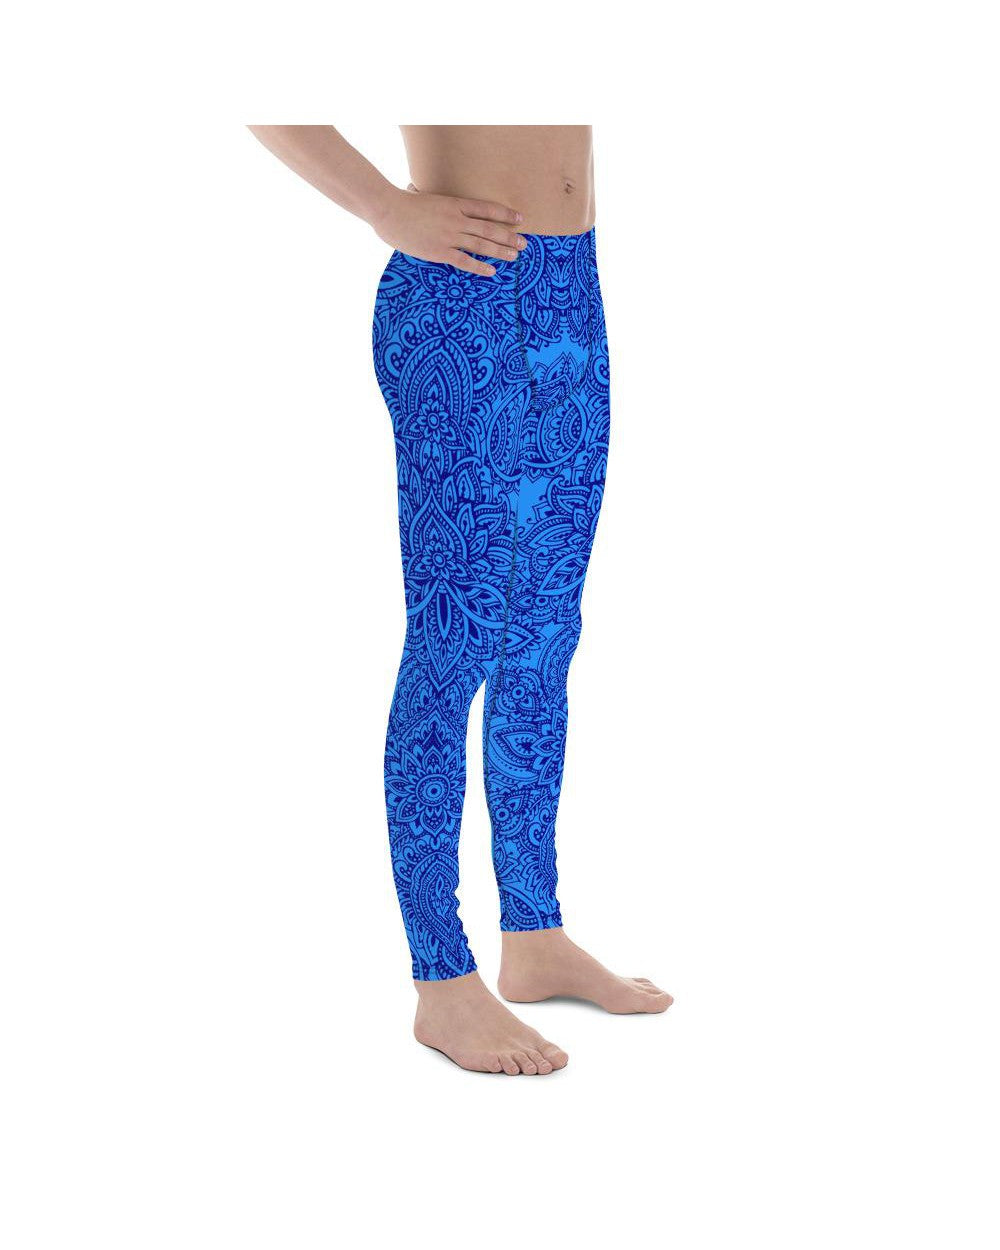 Blue and Navy Henna Tattoo Meggings Gearbunch Men's Leggings 